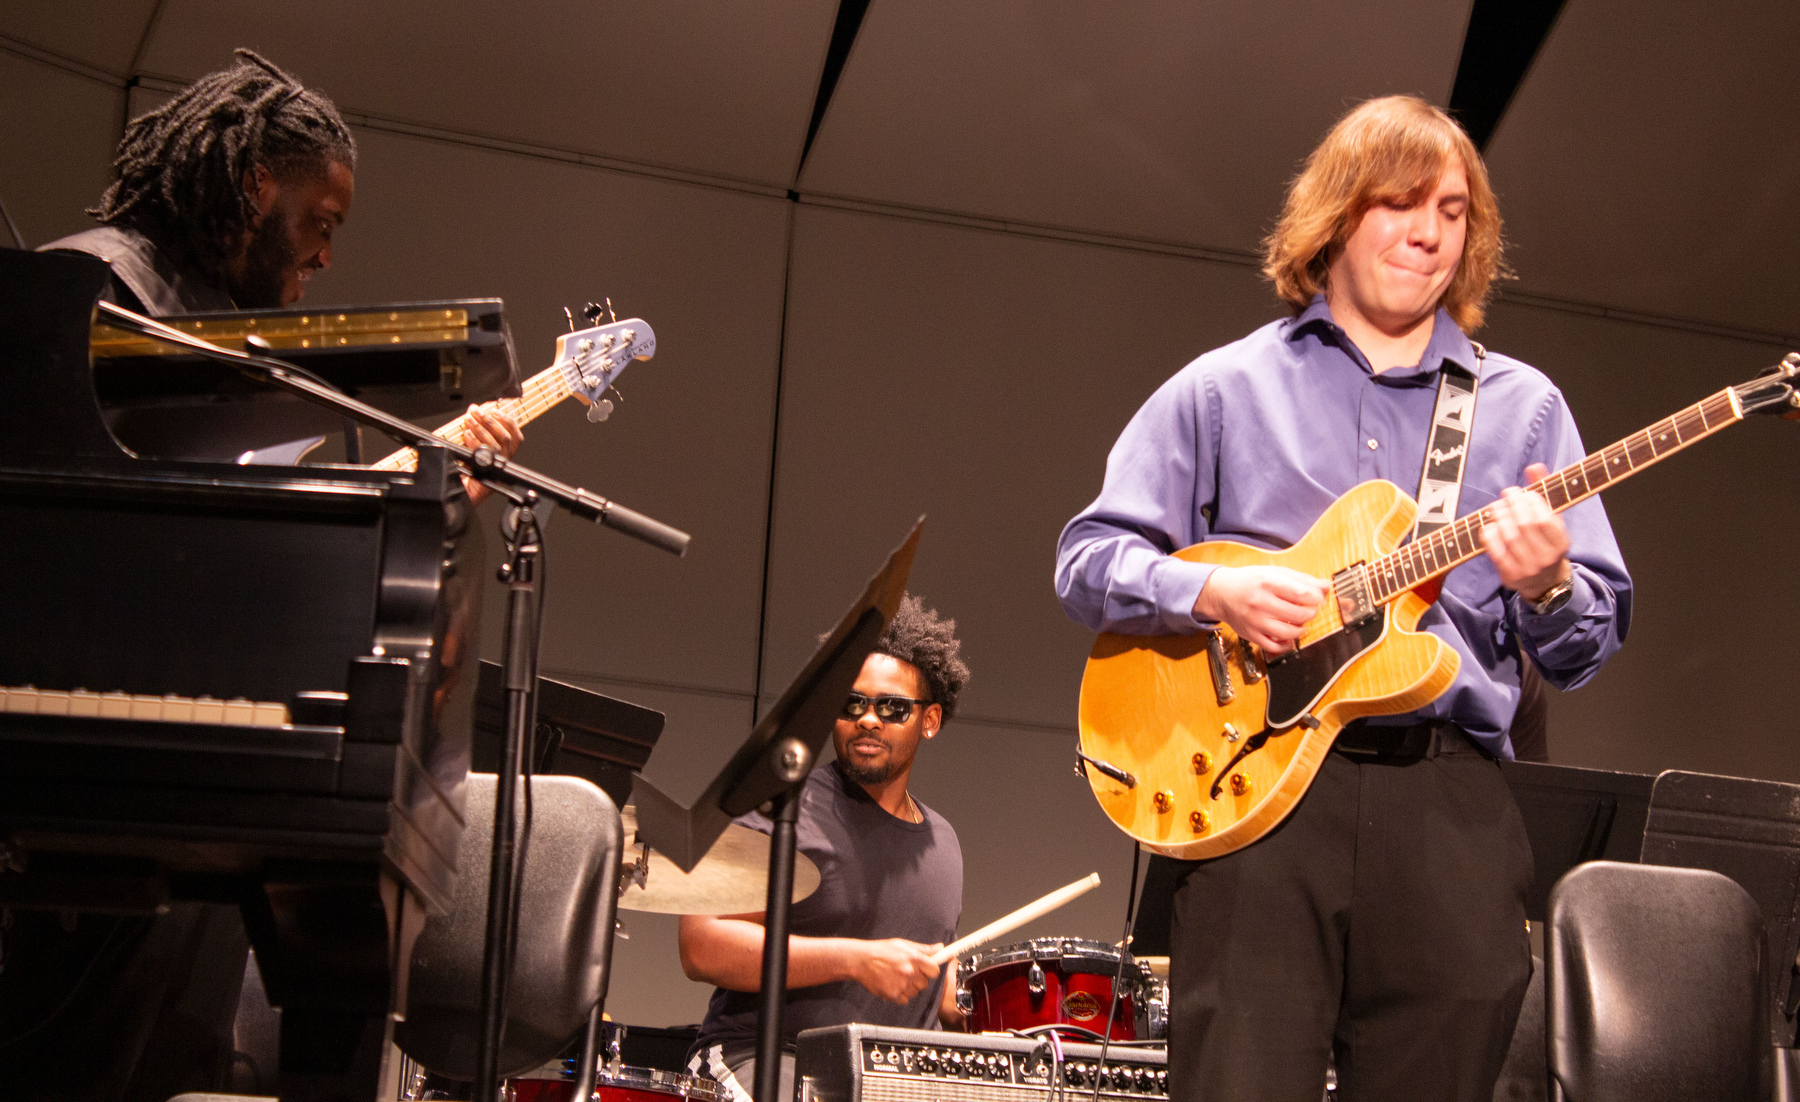 An original composition featuring student musicians during the Music Department's Collage Concert included Timothy Altbacker, vocals and rhythm guitar; Brandon Schmitt, lead guitar (left); Elijah Gebera, bass (right); Cameron Polidore, drums (center); and Angelo Antonelli, synth.